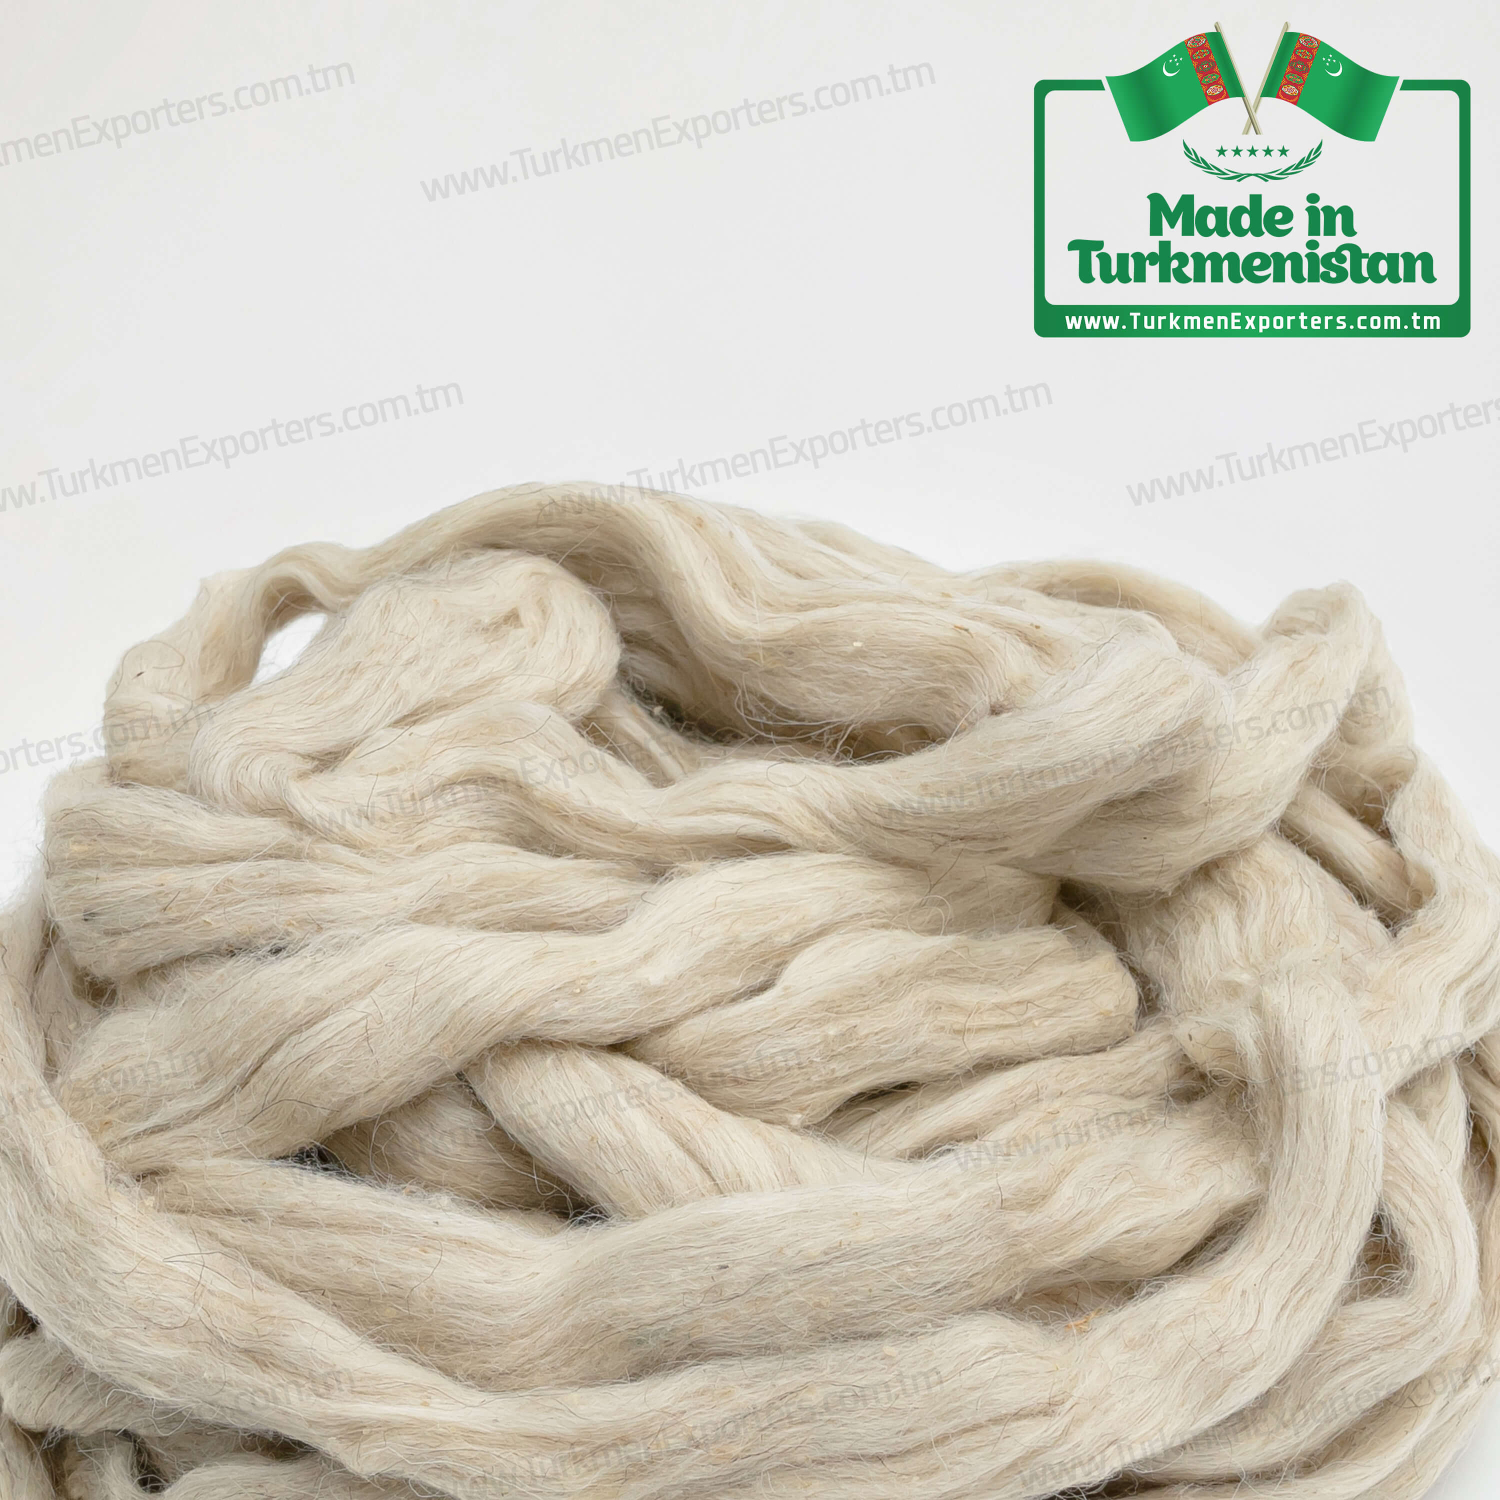 Sheep wool Made in Turkmenistan | Turkmen Export, Import & Trading Services Company